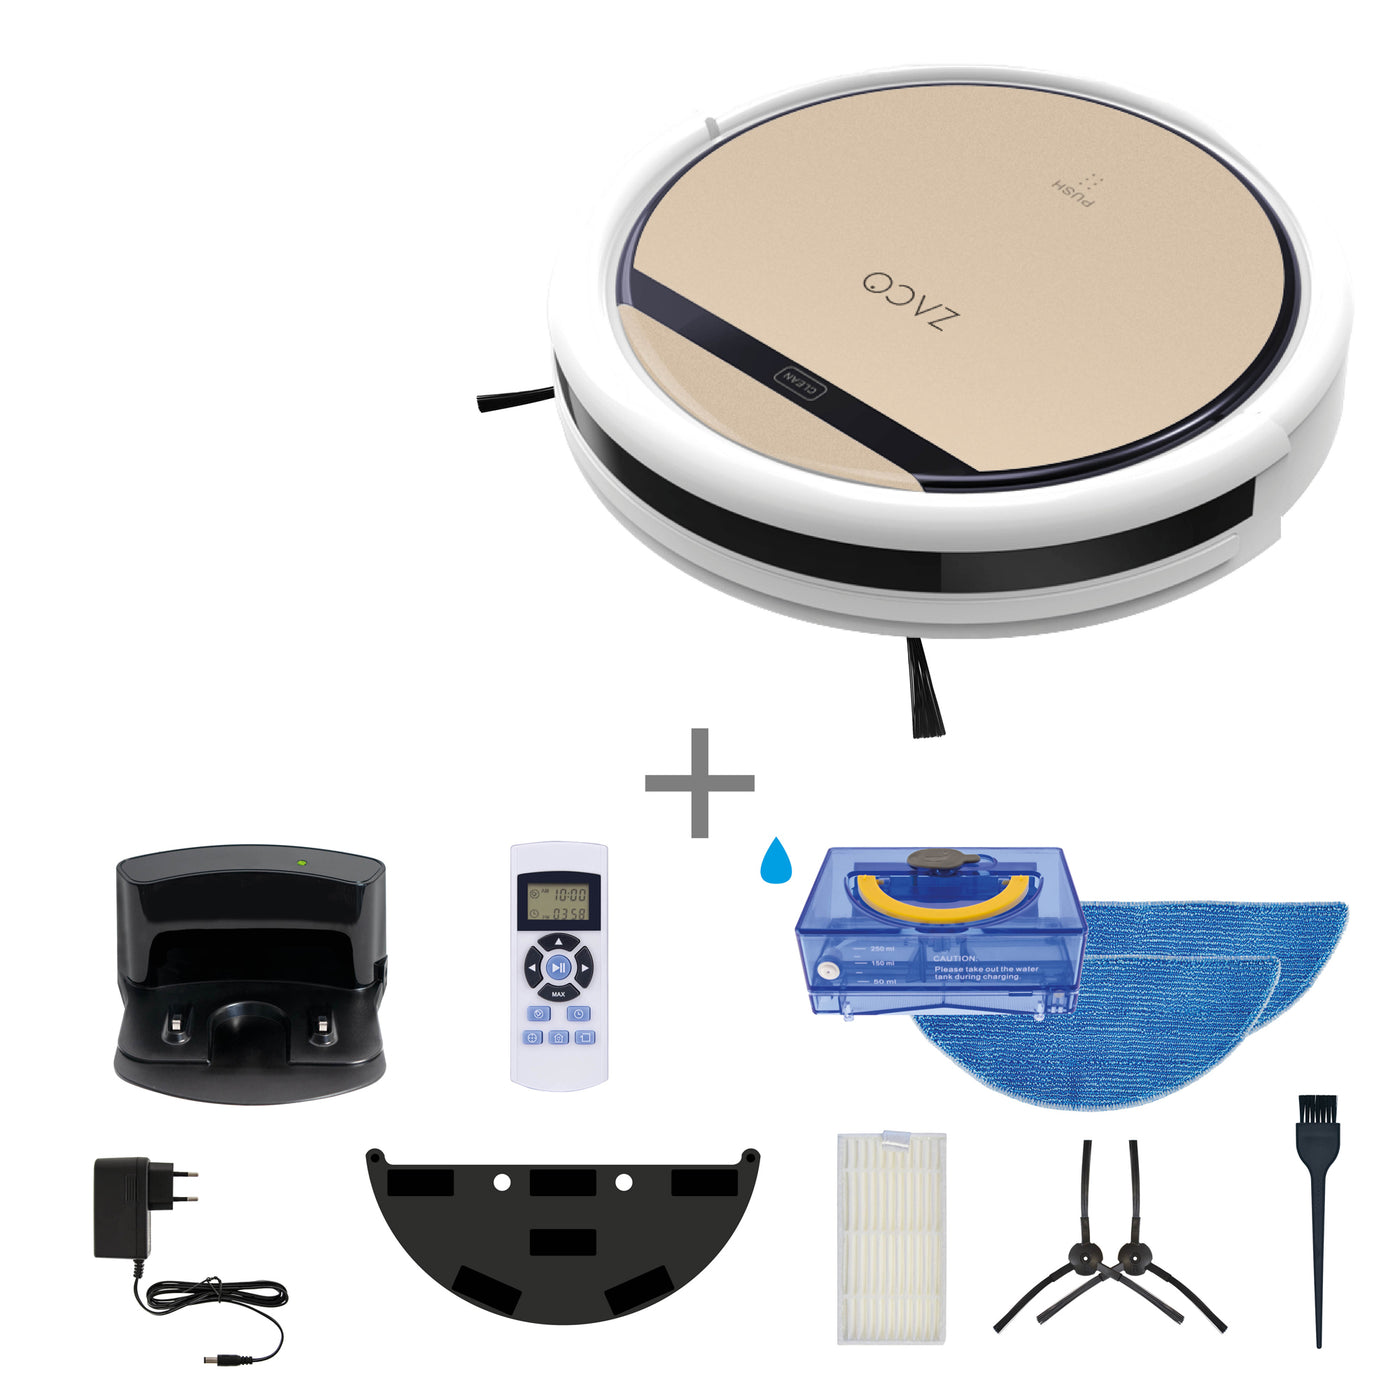 ZACO V5sPro vacuuming and mopping robot